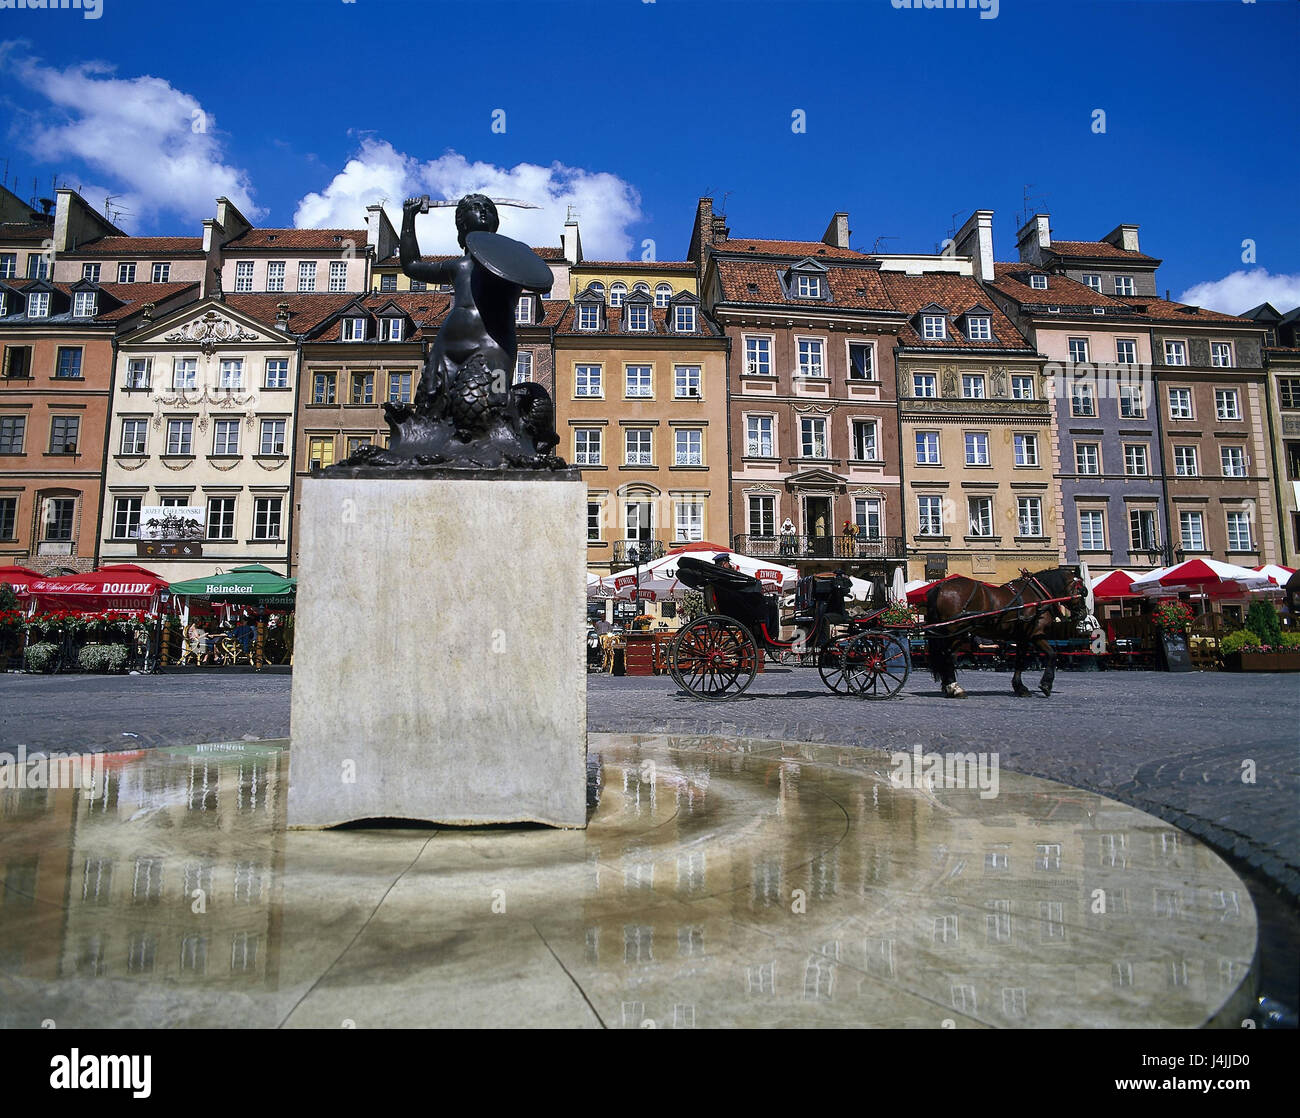 Poland, Warsaw, Old Town, castle square, monument, horse's carriage, street cafes of East Europe, UNESCO-world cultural heritage, marketplace, terrace, house line, town houses, tourism Stock Photo